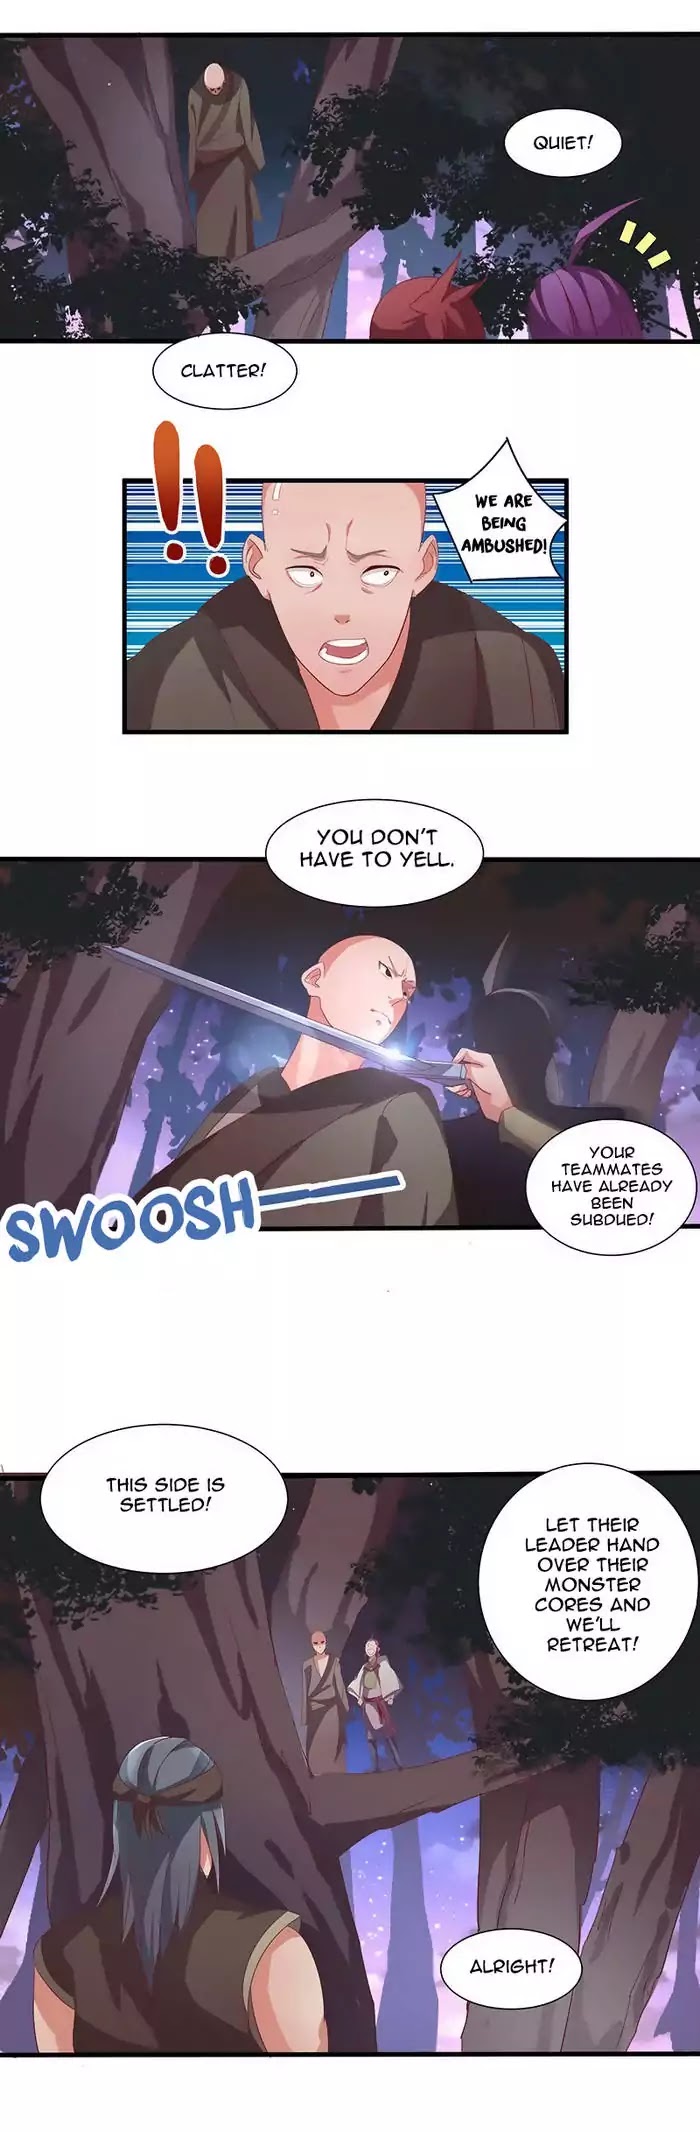 Chaotic Sword God - Page 1